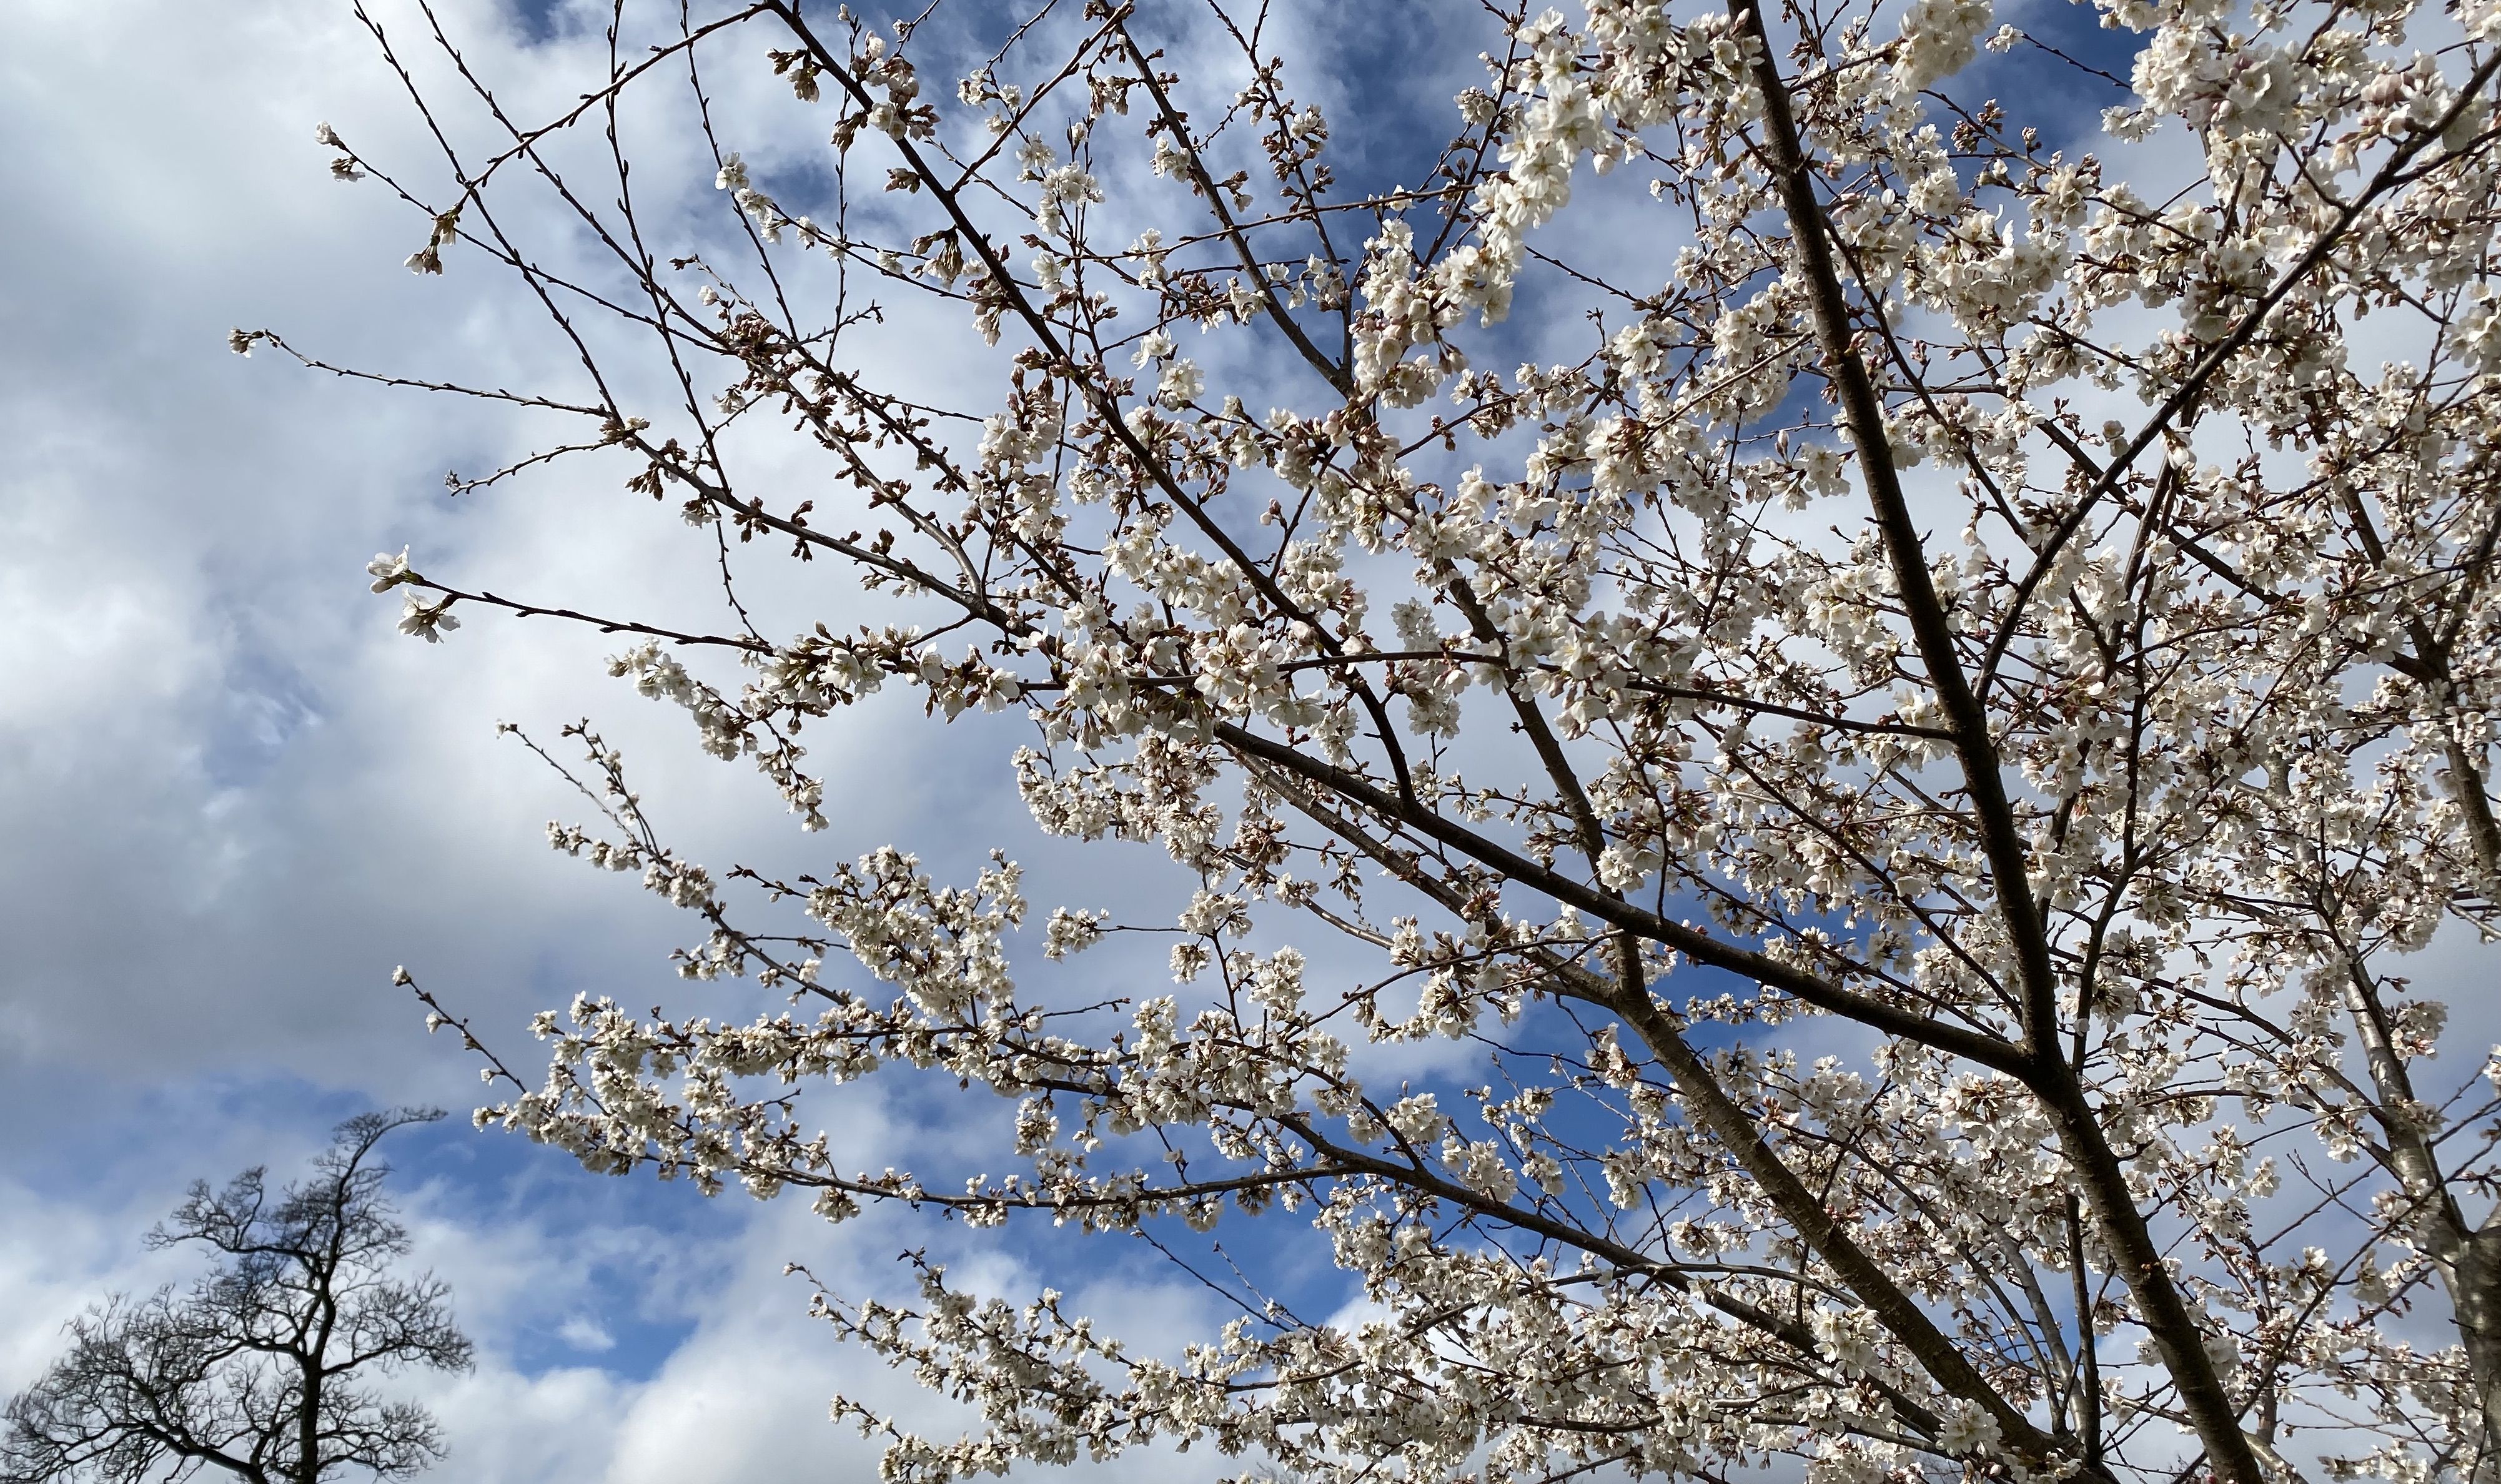 A flowering cherry tree reaches into a cloudy sky